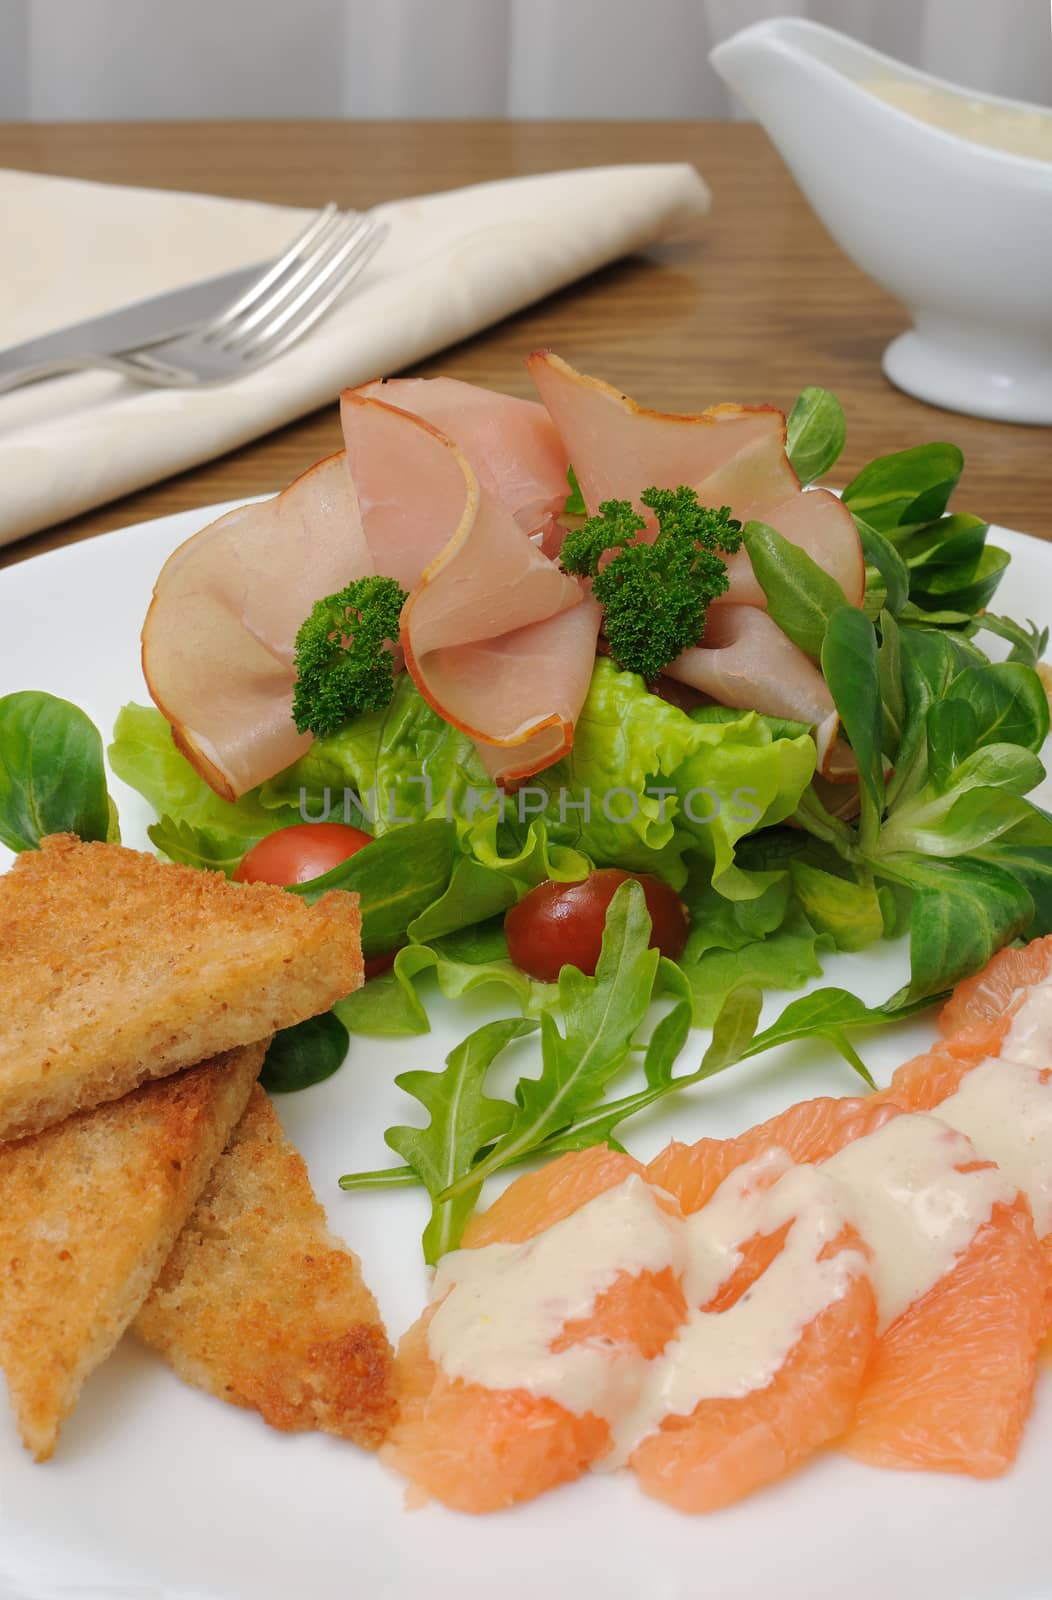 Appetizer of jamon with vegetables by Apolonia